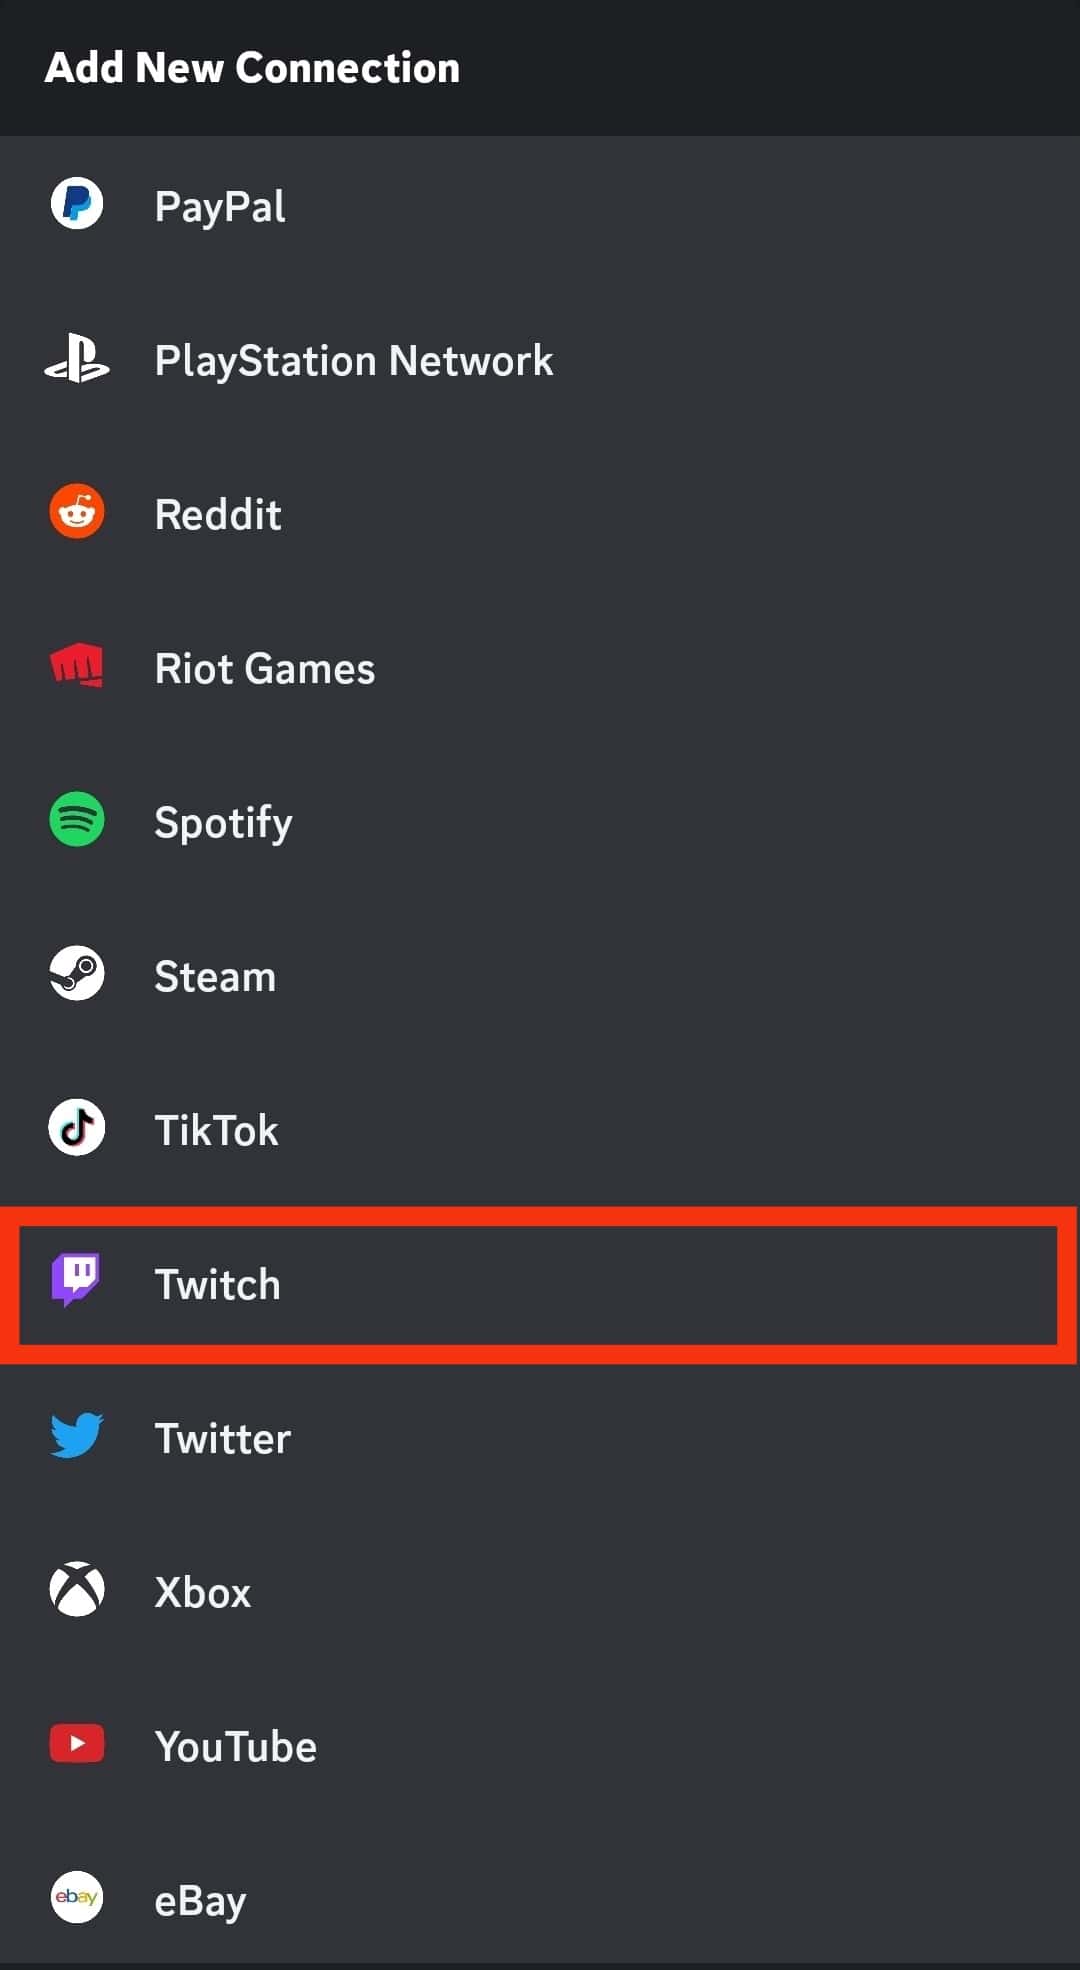 Locate And Tap The Twitch Button